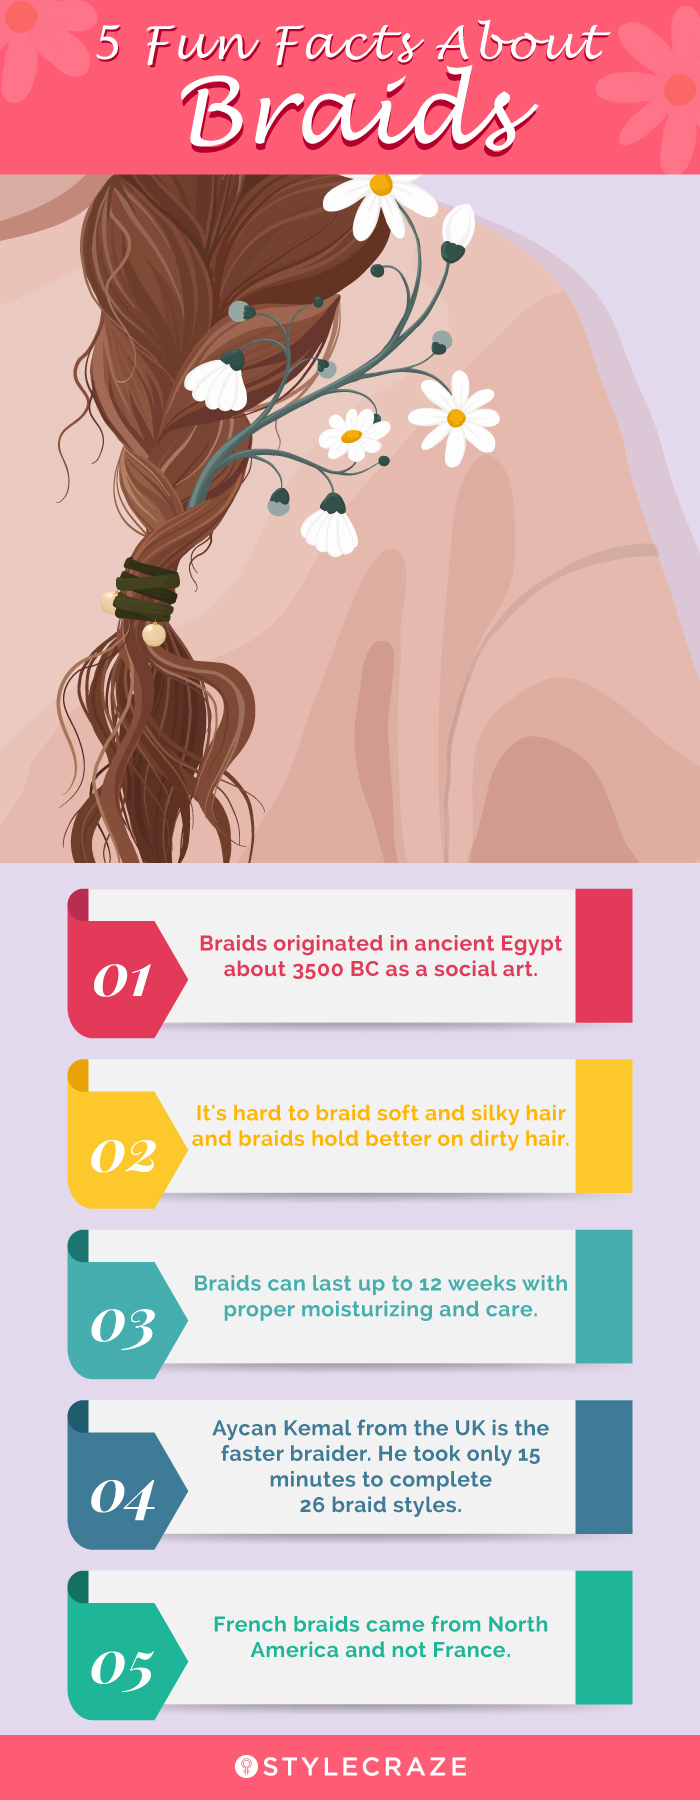 5 fun facts about braids [infographic]